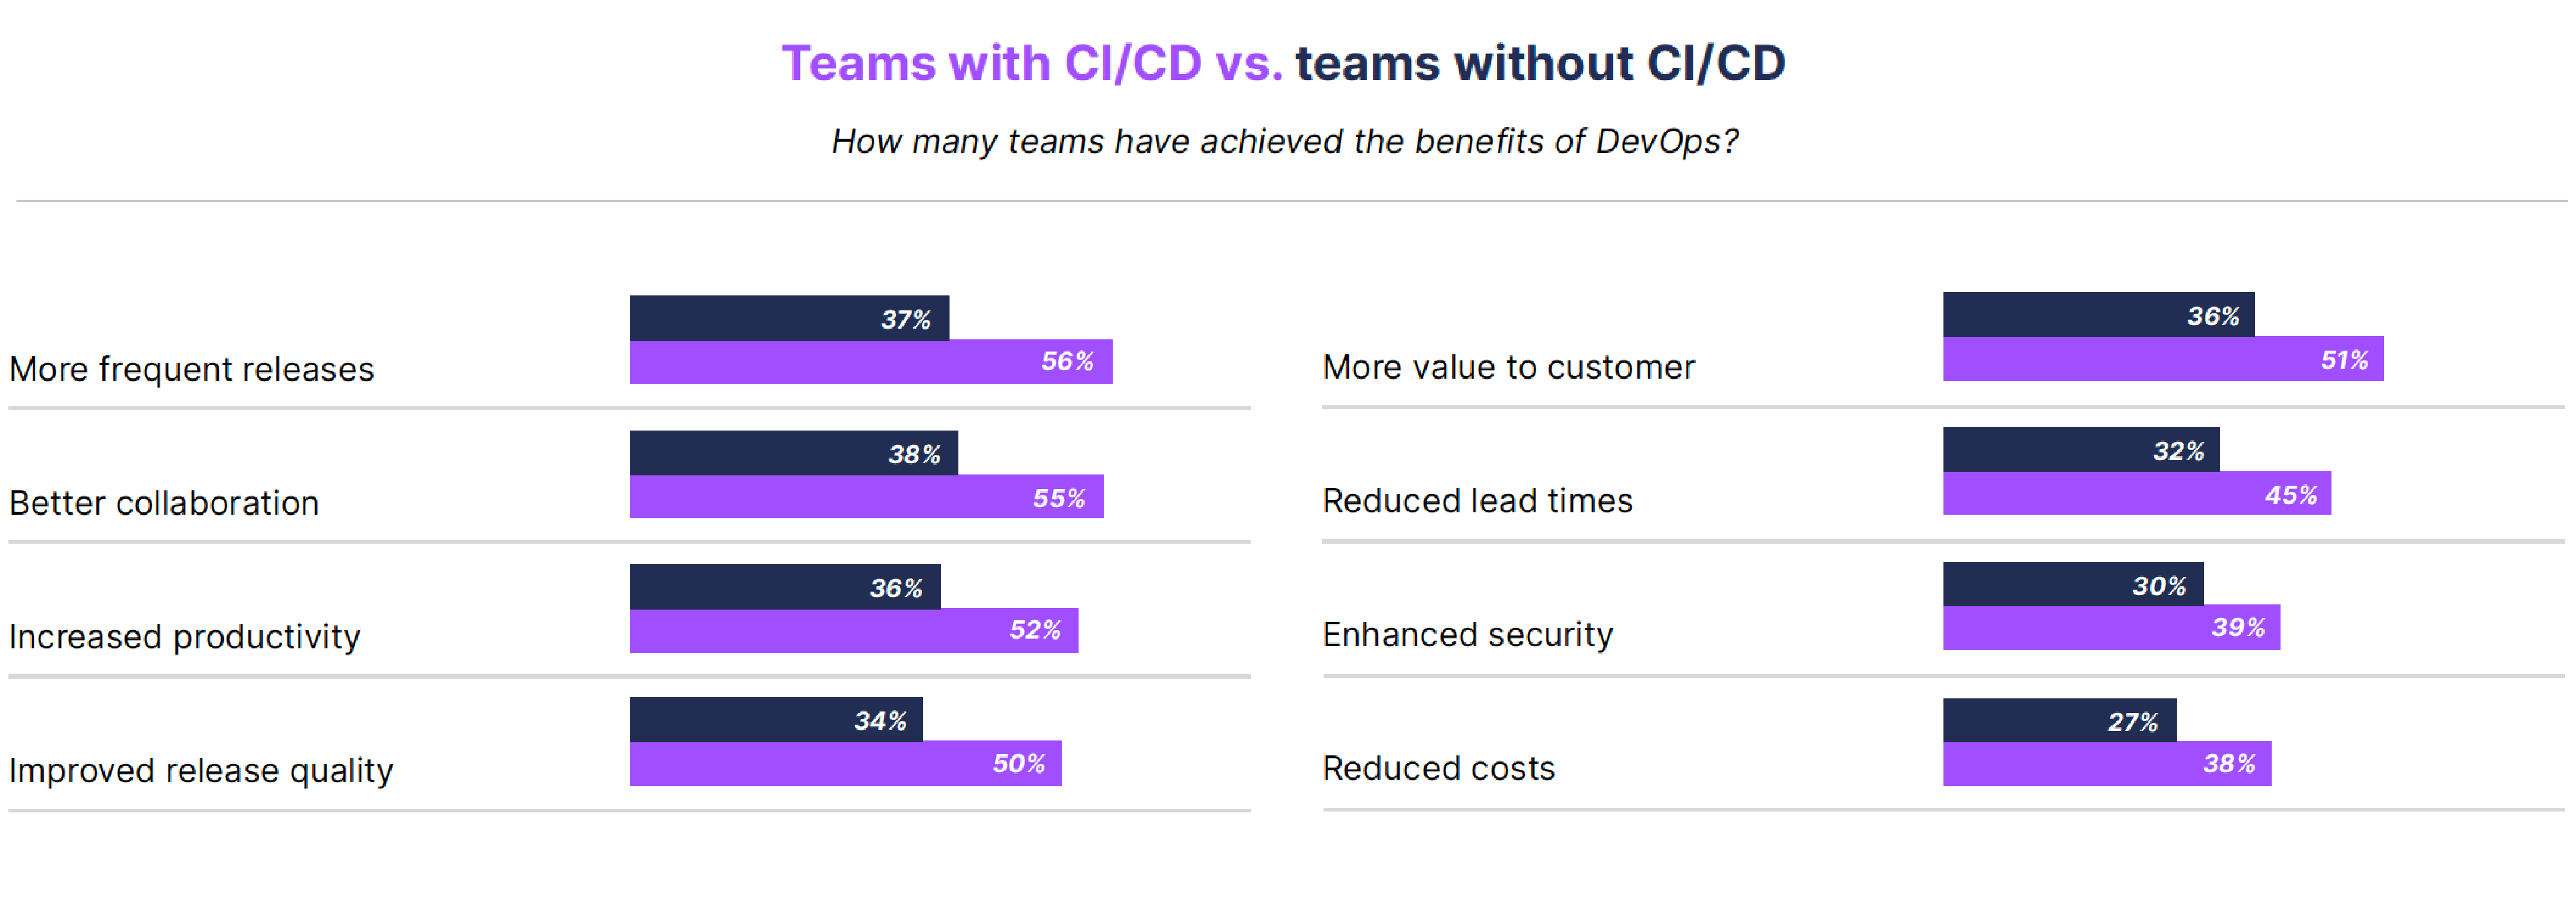 Salesforce teams with CI/CD outperform all others